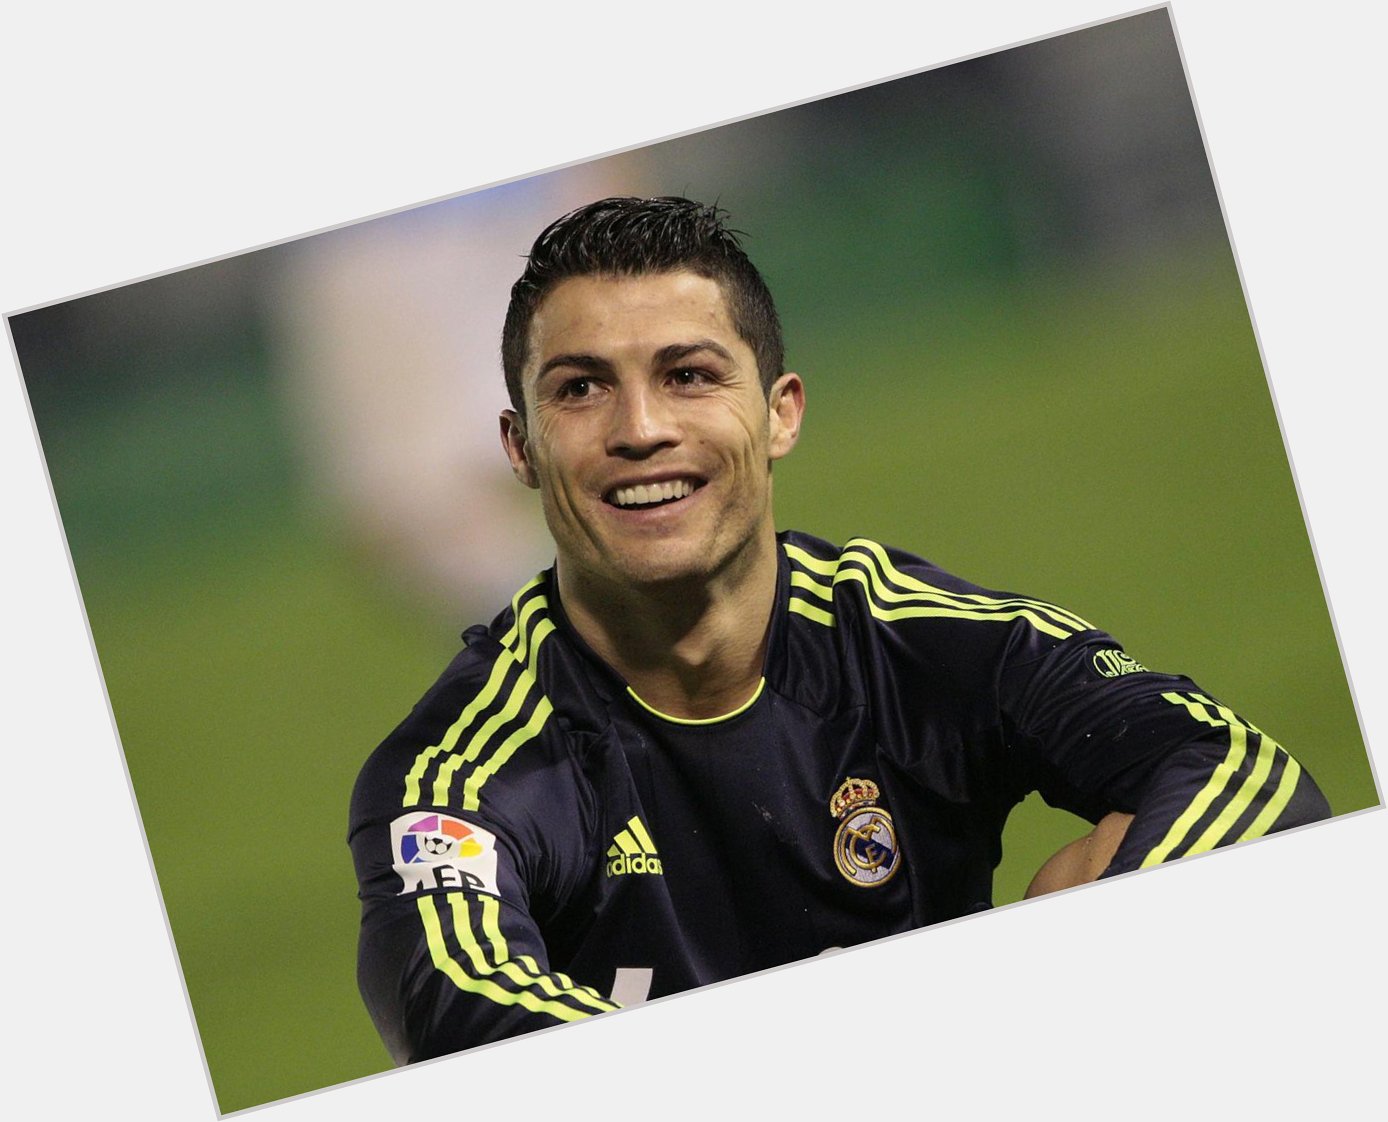 I almost forgot! Happy birthday to one of the greatest soccer players around, Cristiano Ronaldo! 